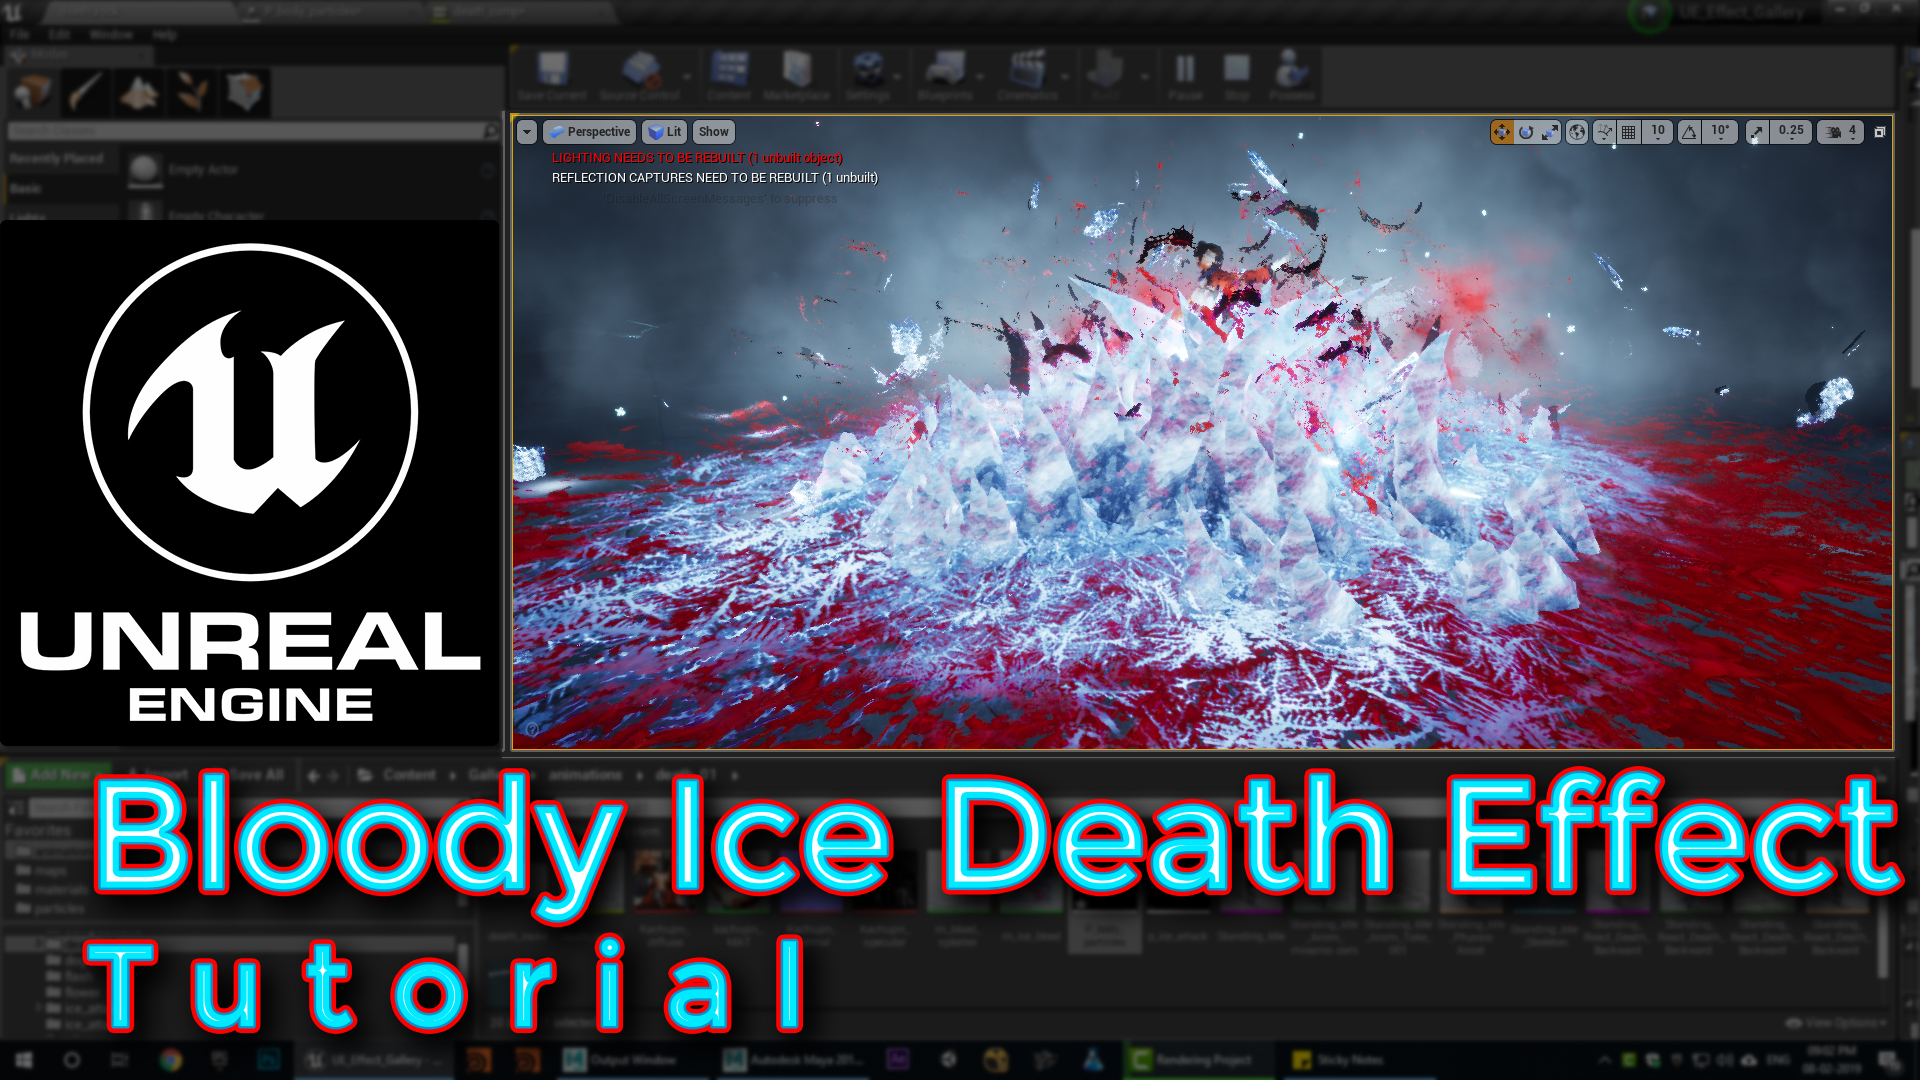 Unreal Engine Bloody Ice Death Effect Tutorial